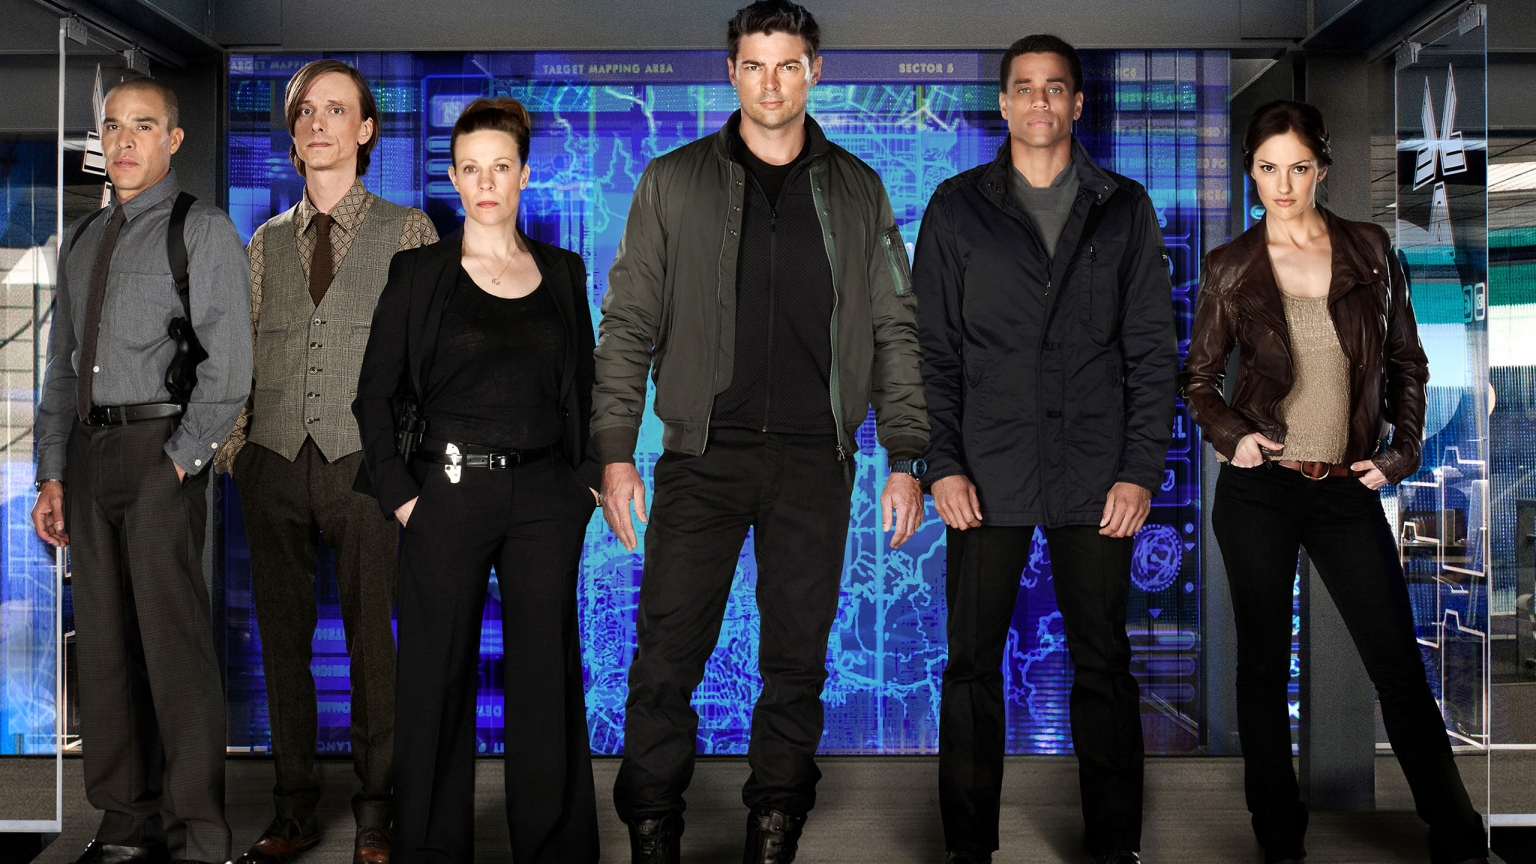 Almost Human Cast for 1536 x 864 HDTV resolution